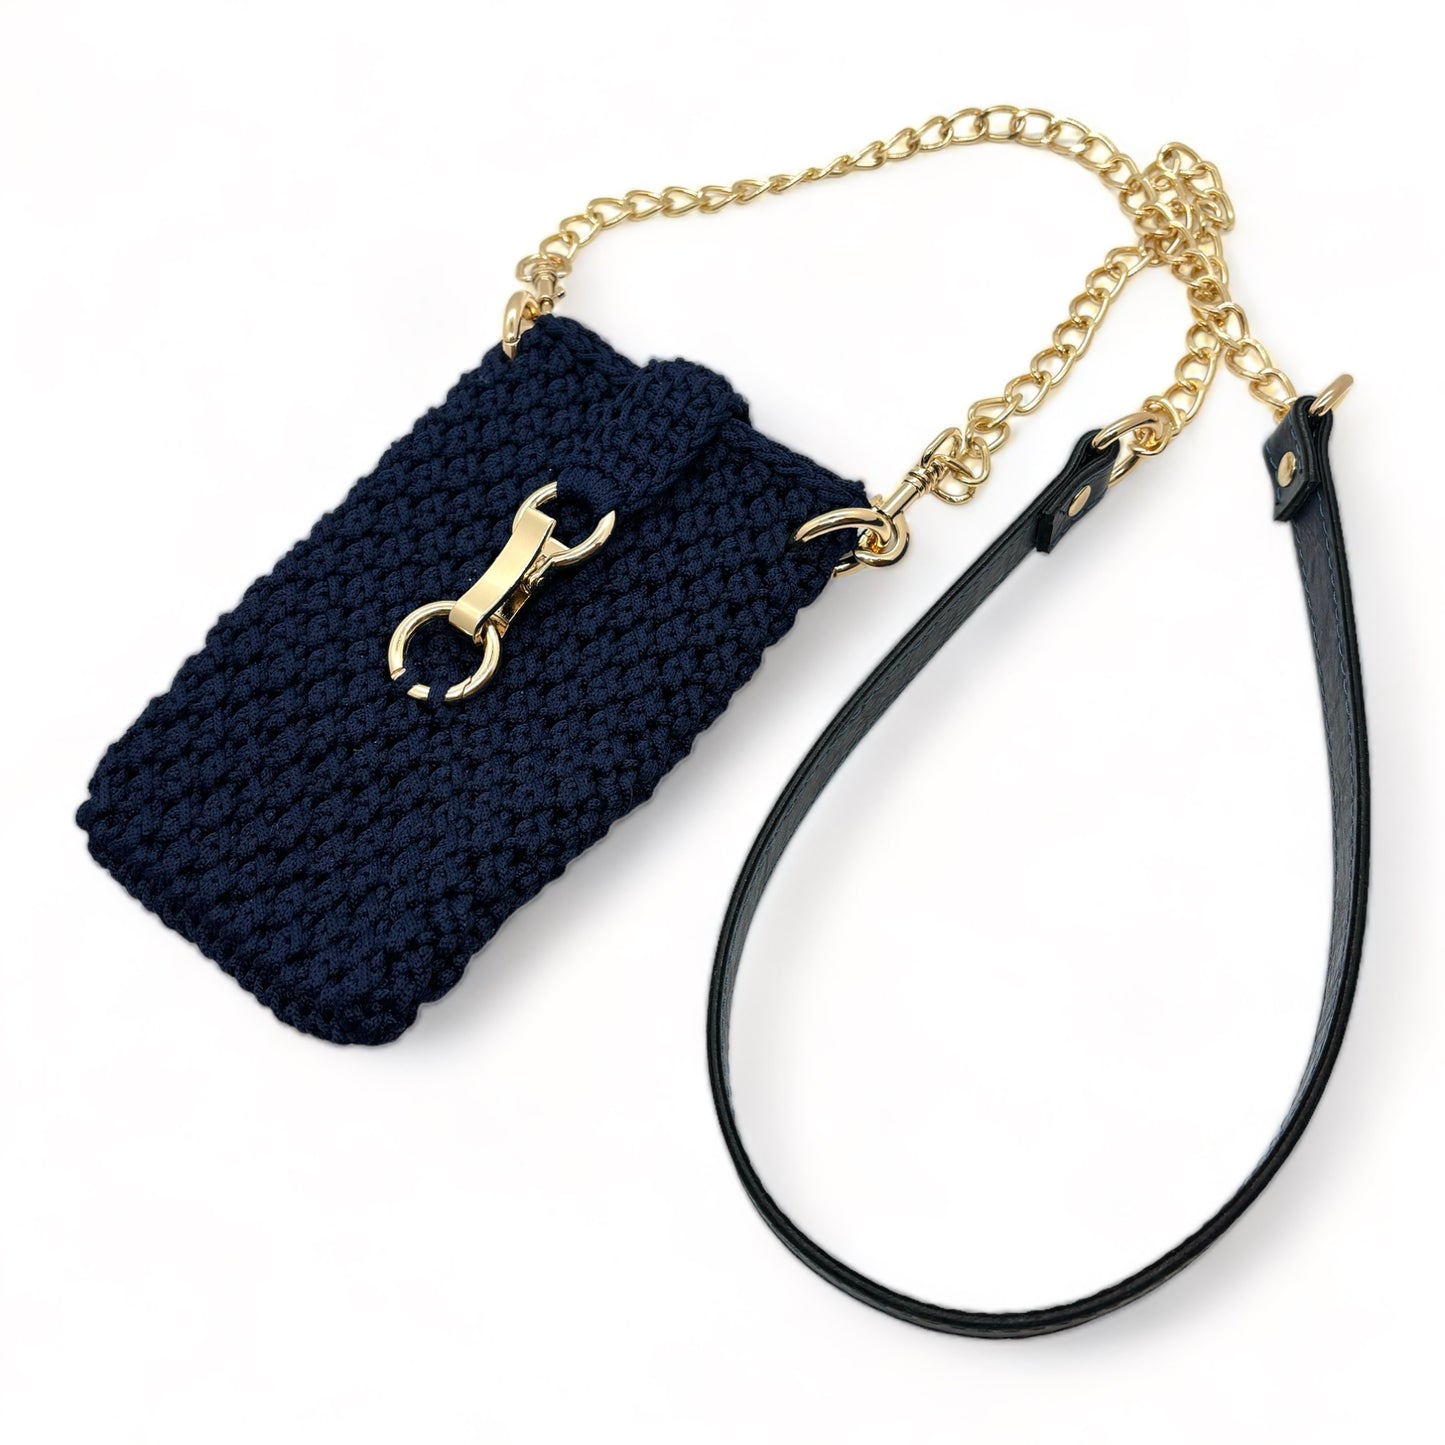 Trendy phone pouch with Eco leather/ metal chain strap